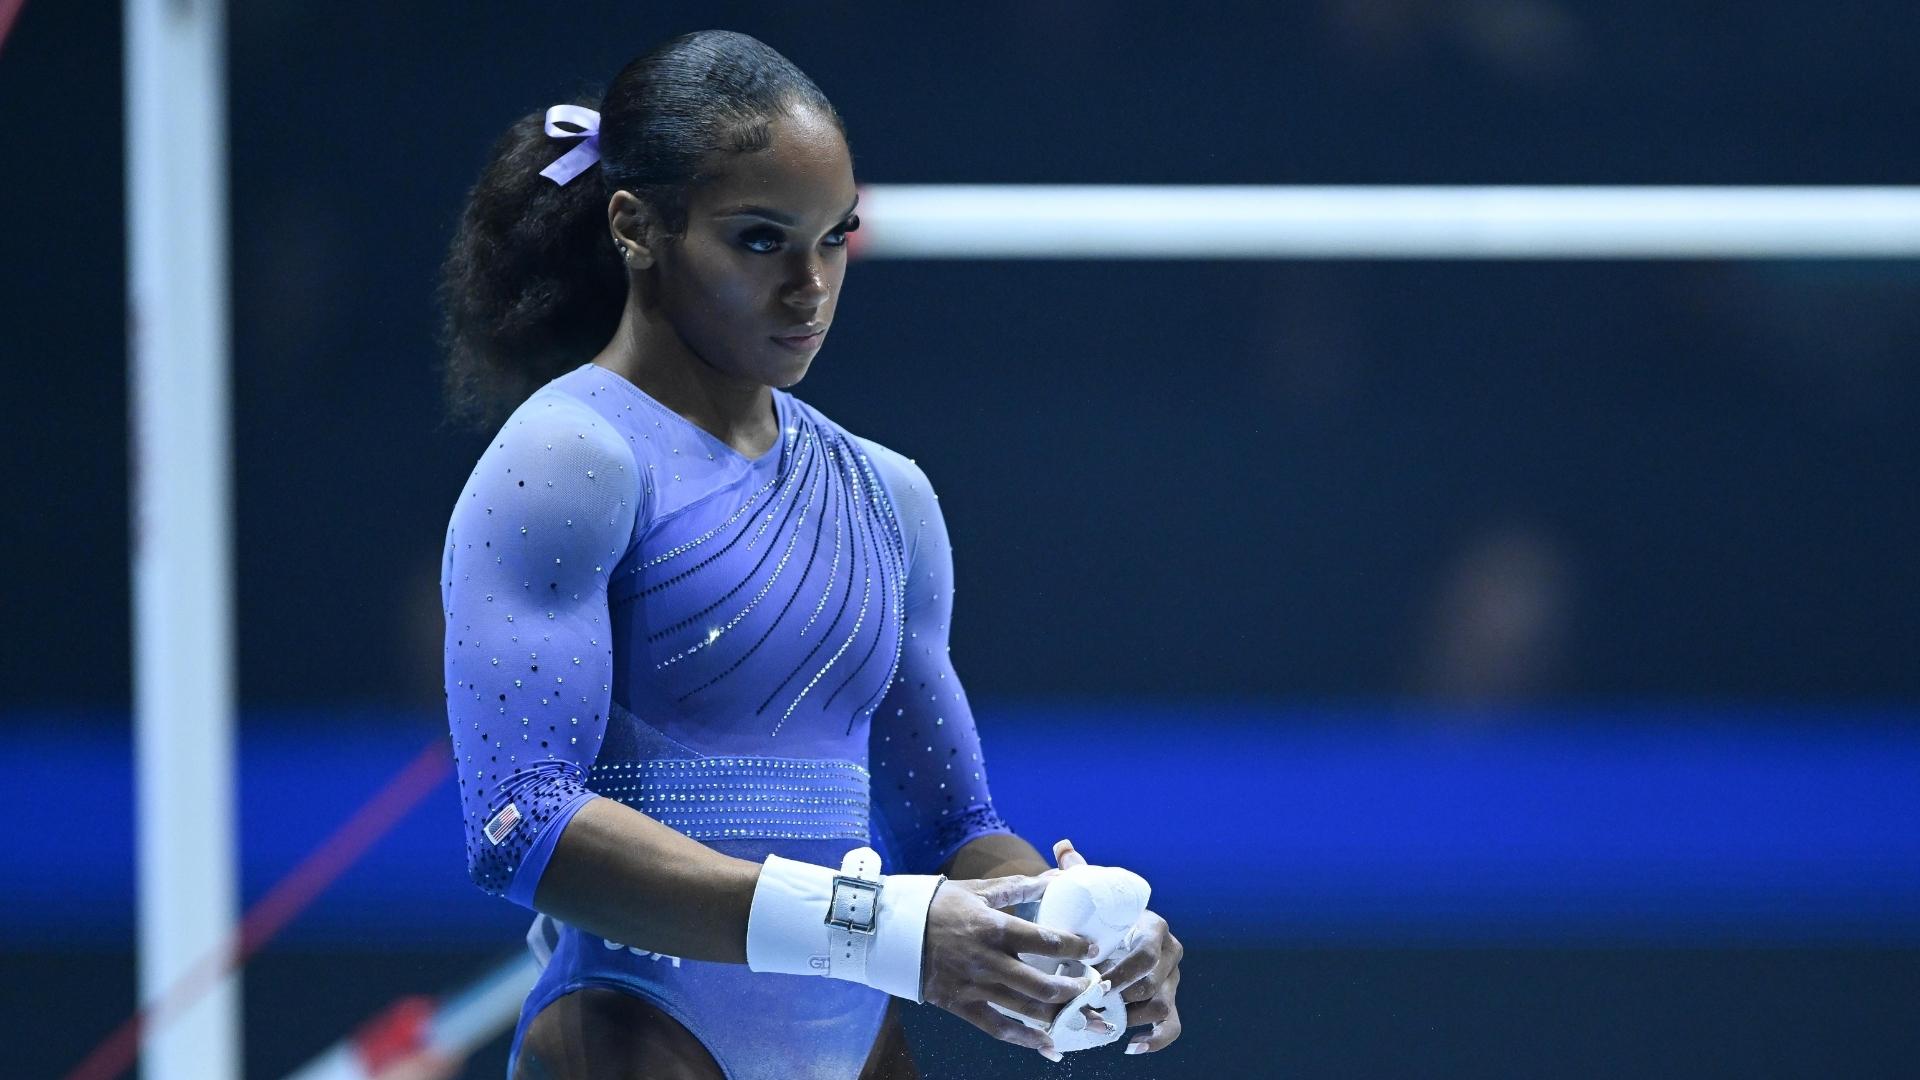 Shilese Jones (USA) chalks up before competing on bars during qualifying at the 2022 World Gymnastics Championships.